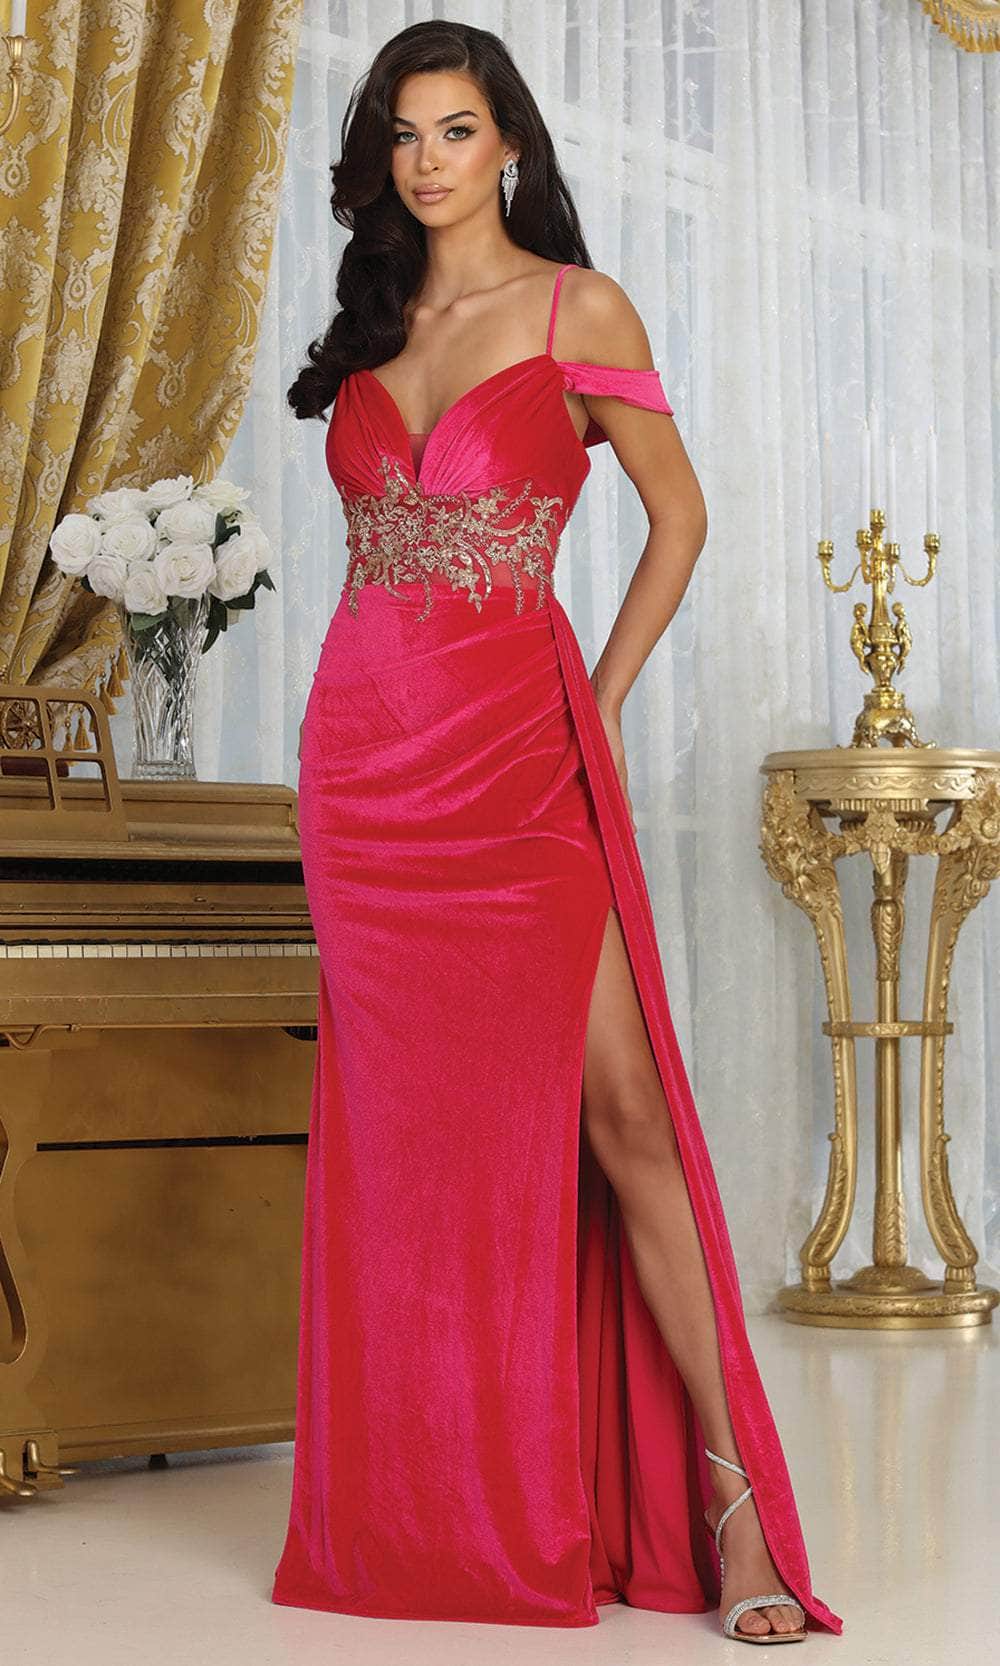 May Queen RQ8087 - Beaded Appliqued Velvet Prom Gown
